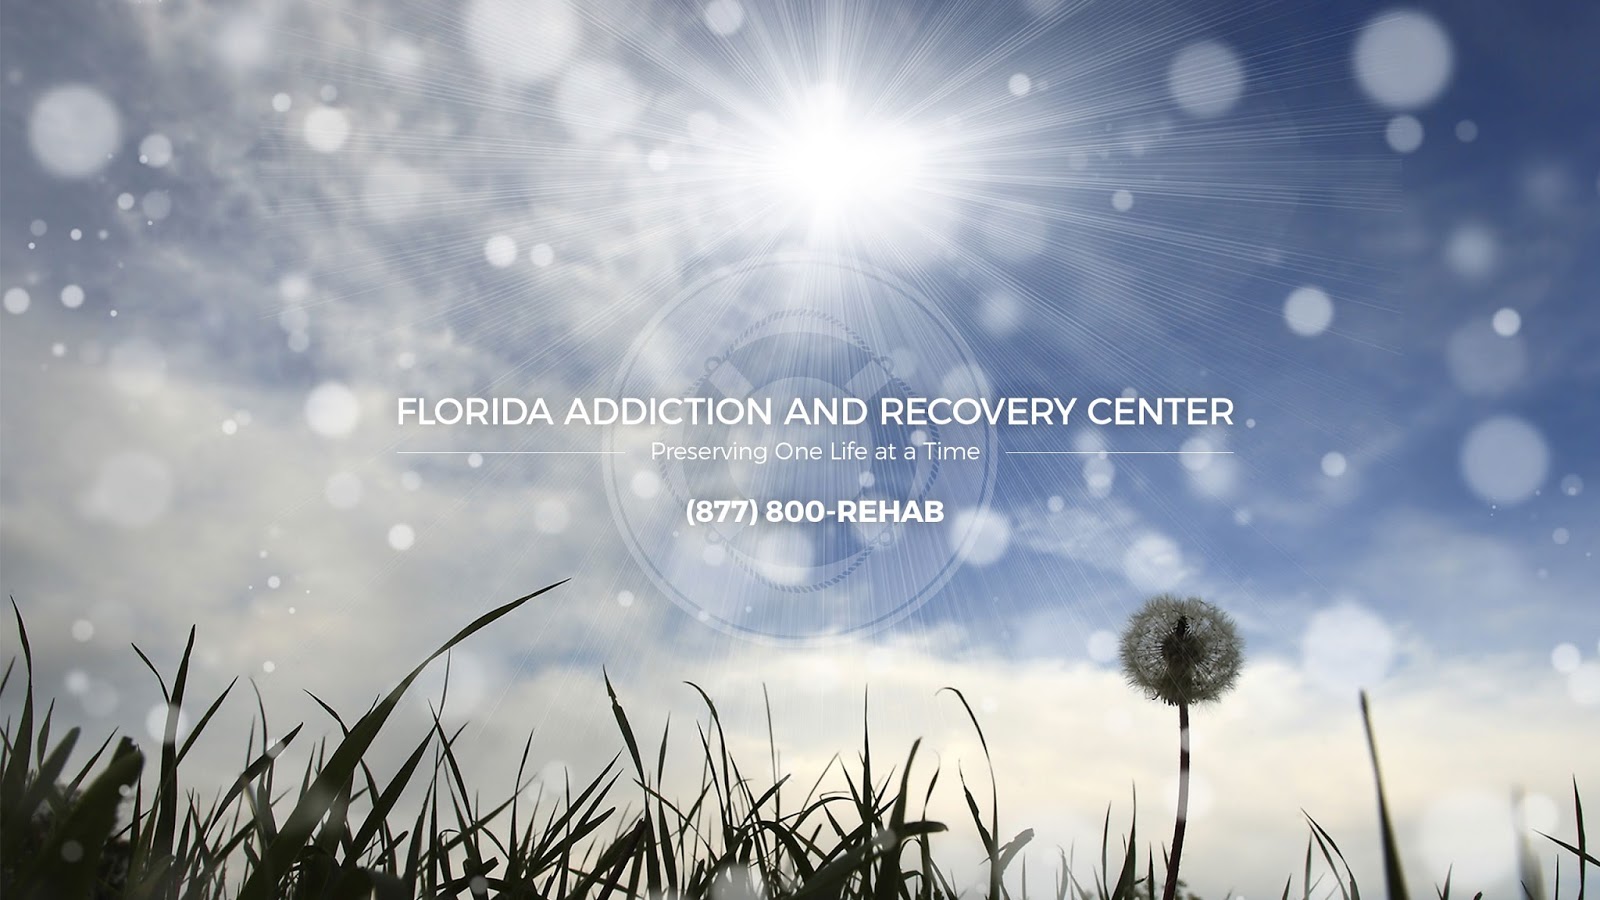 Florida Addiction and Recovery Center